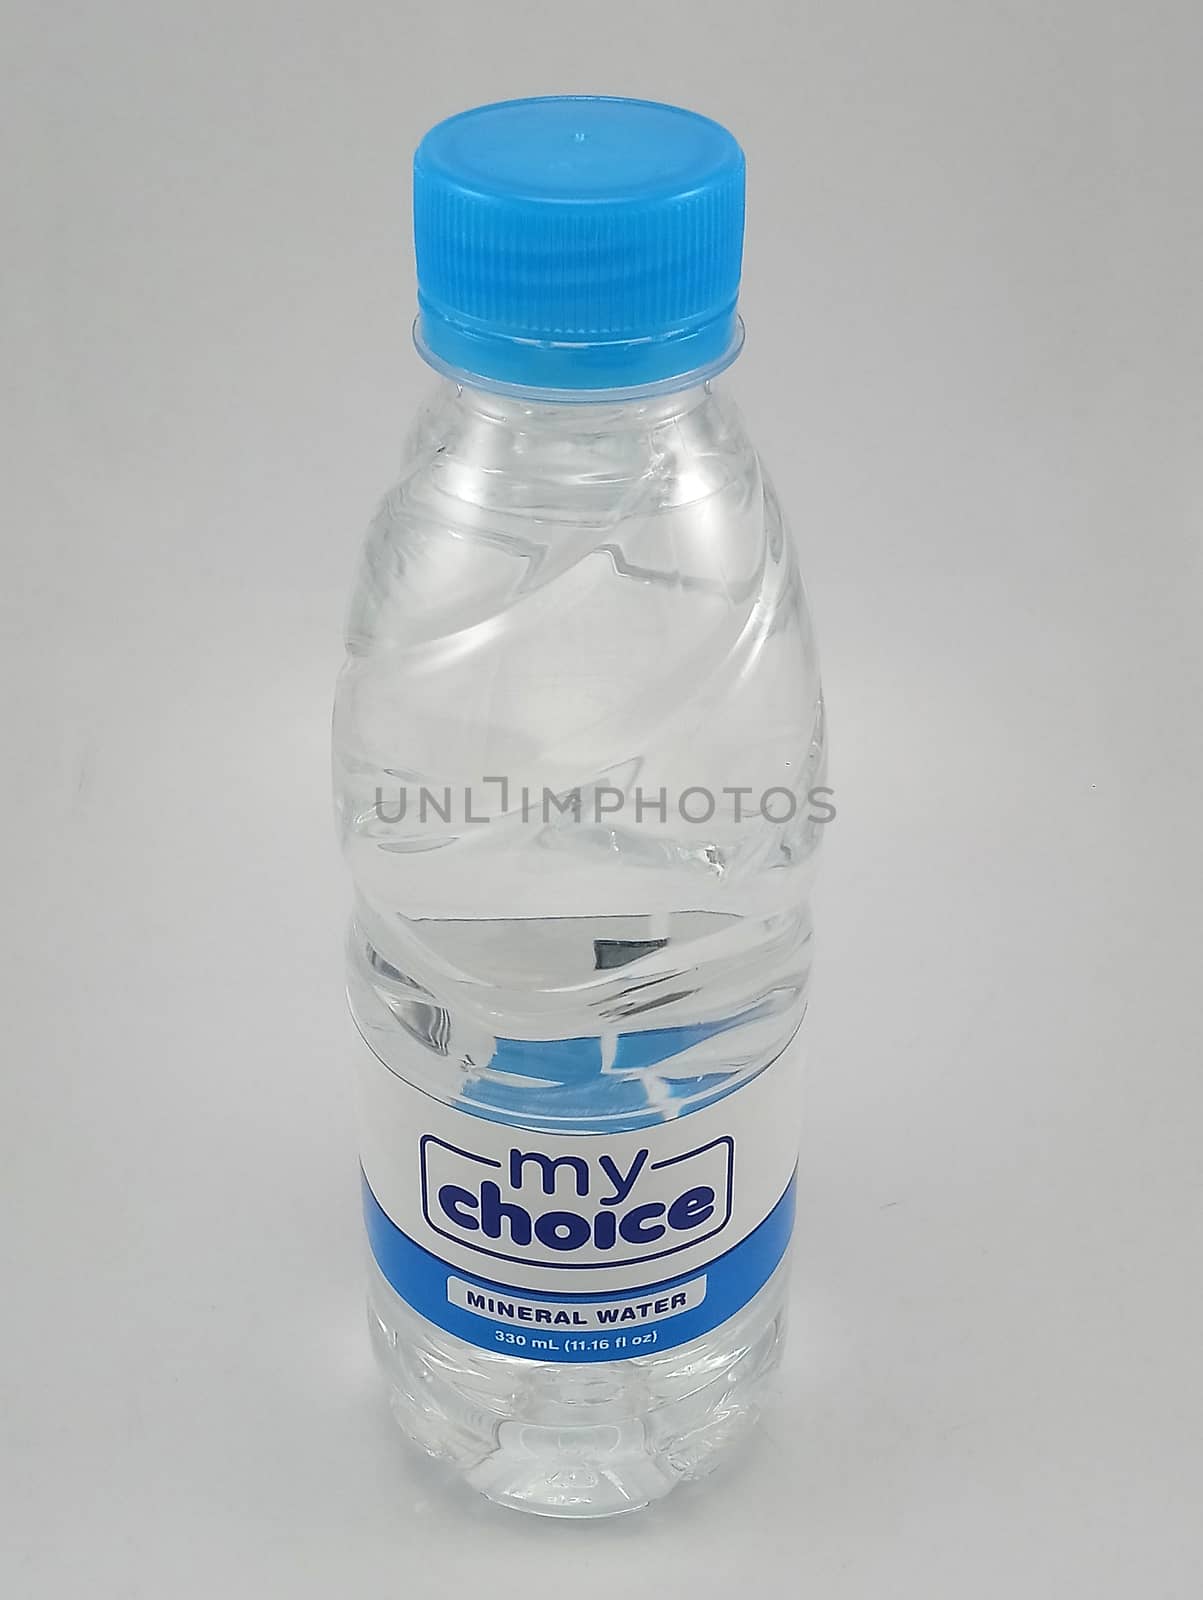 My choice mineral water in Manila, Philippines by imwaltersy